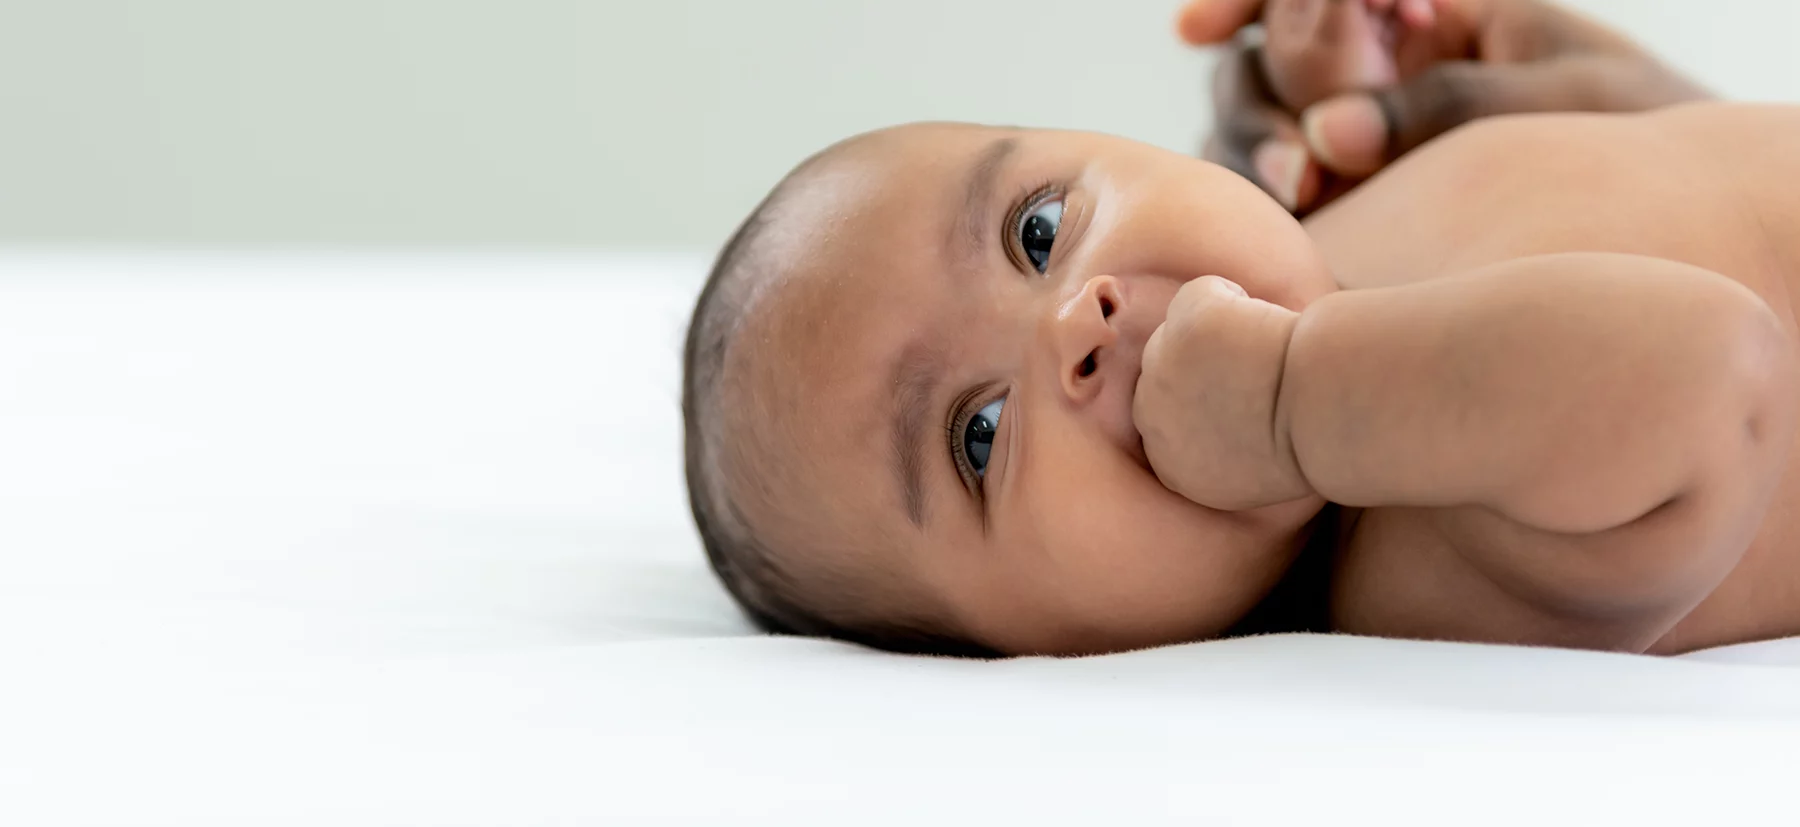 newborn baby with their hand in their mouth. Lactation consultant testimonials.